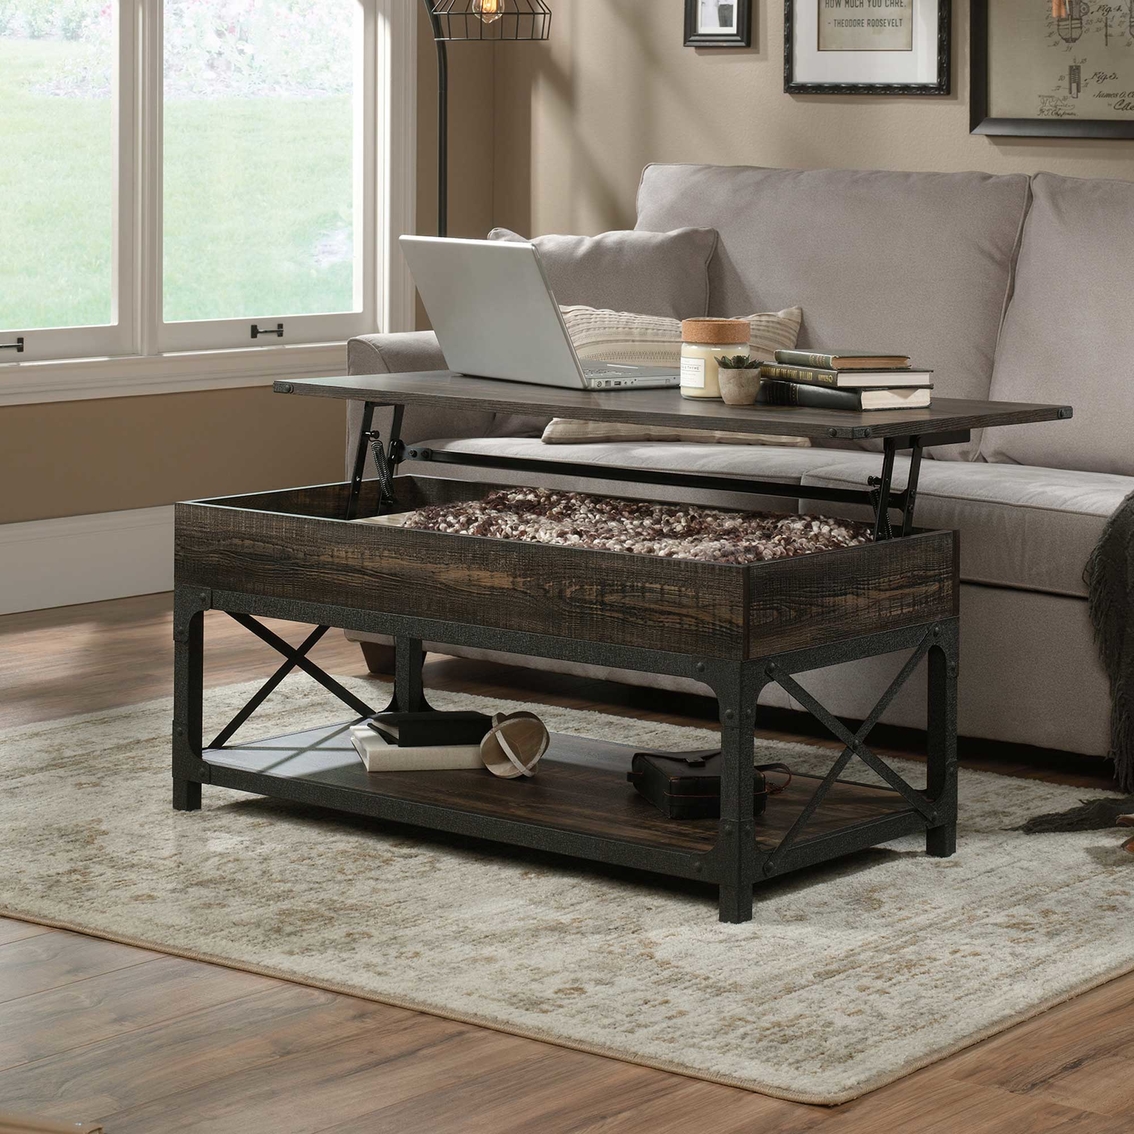 Sauder Steel River Lift Top Coffee Table - Image 2 of 10